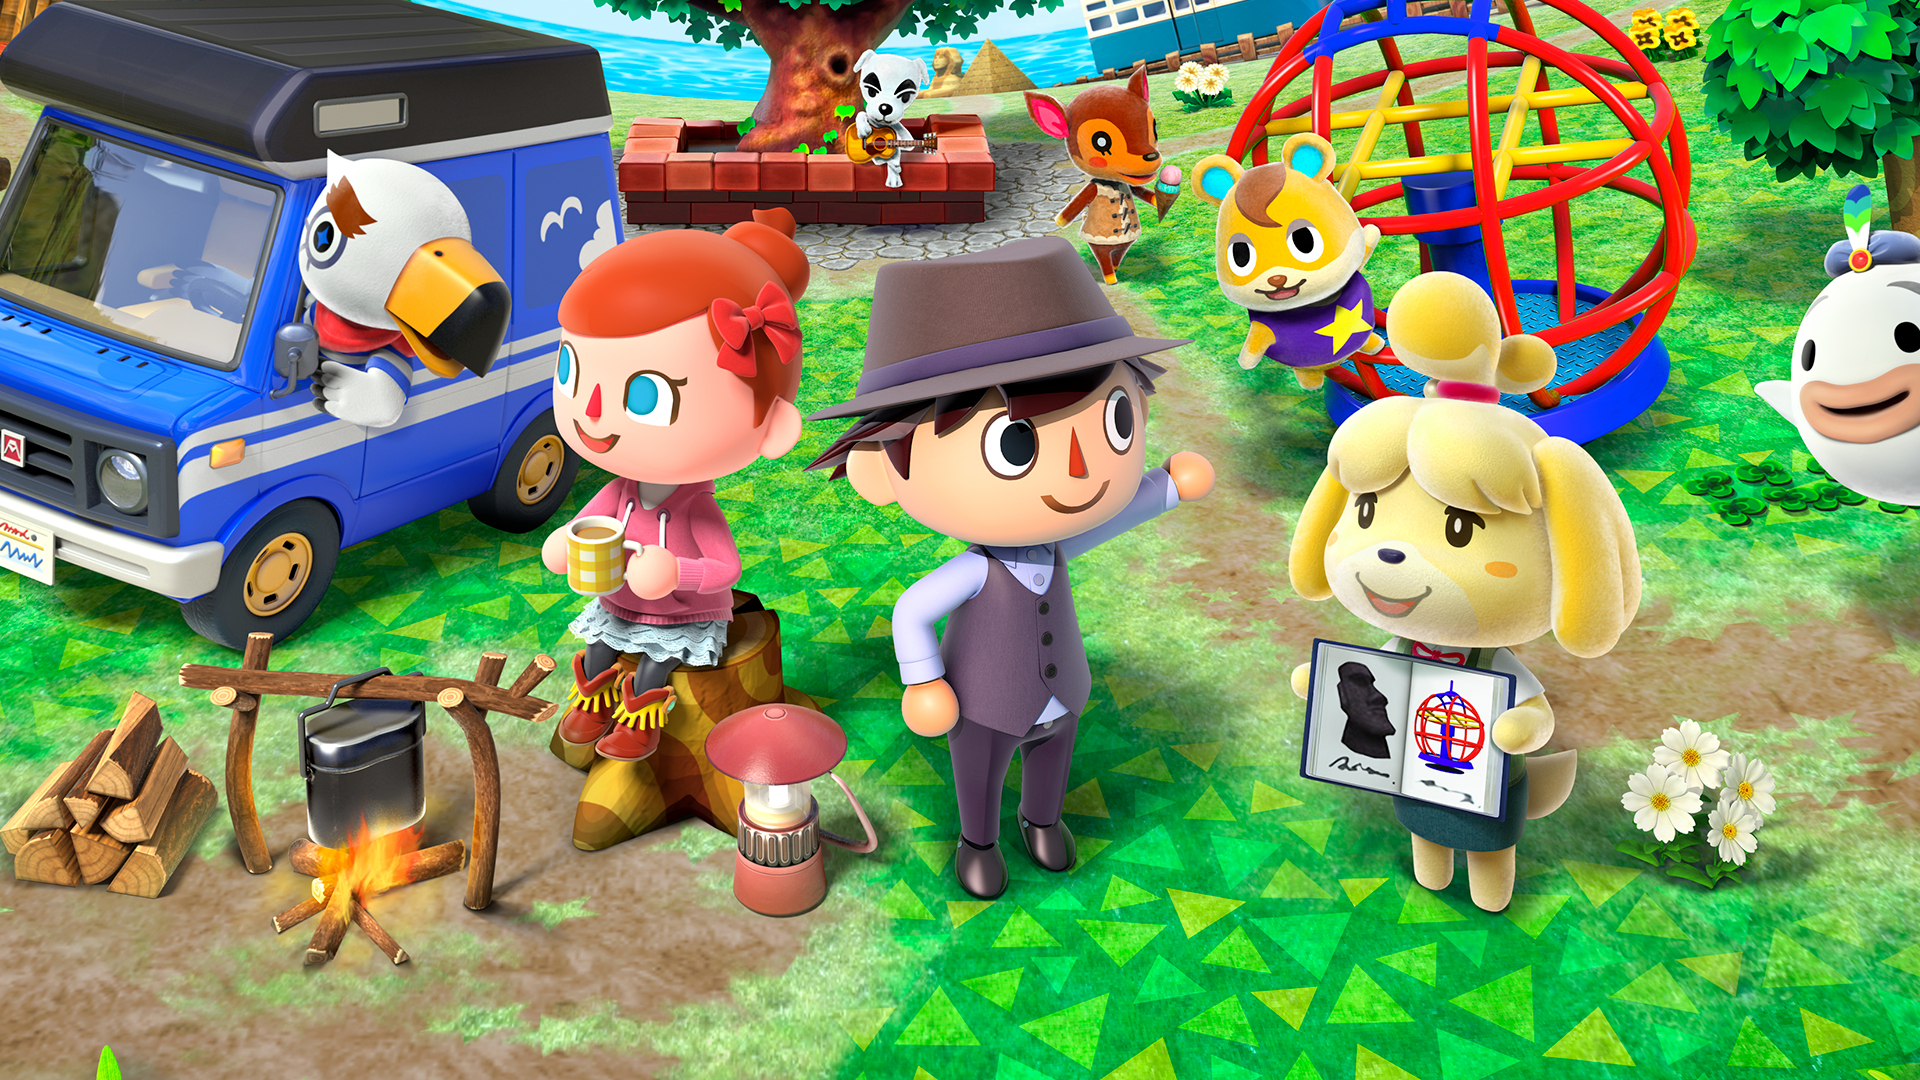 Best 3DS games - Animal Crossing: New Leaf